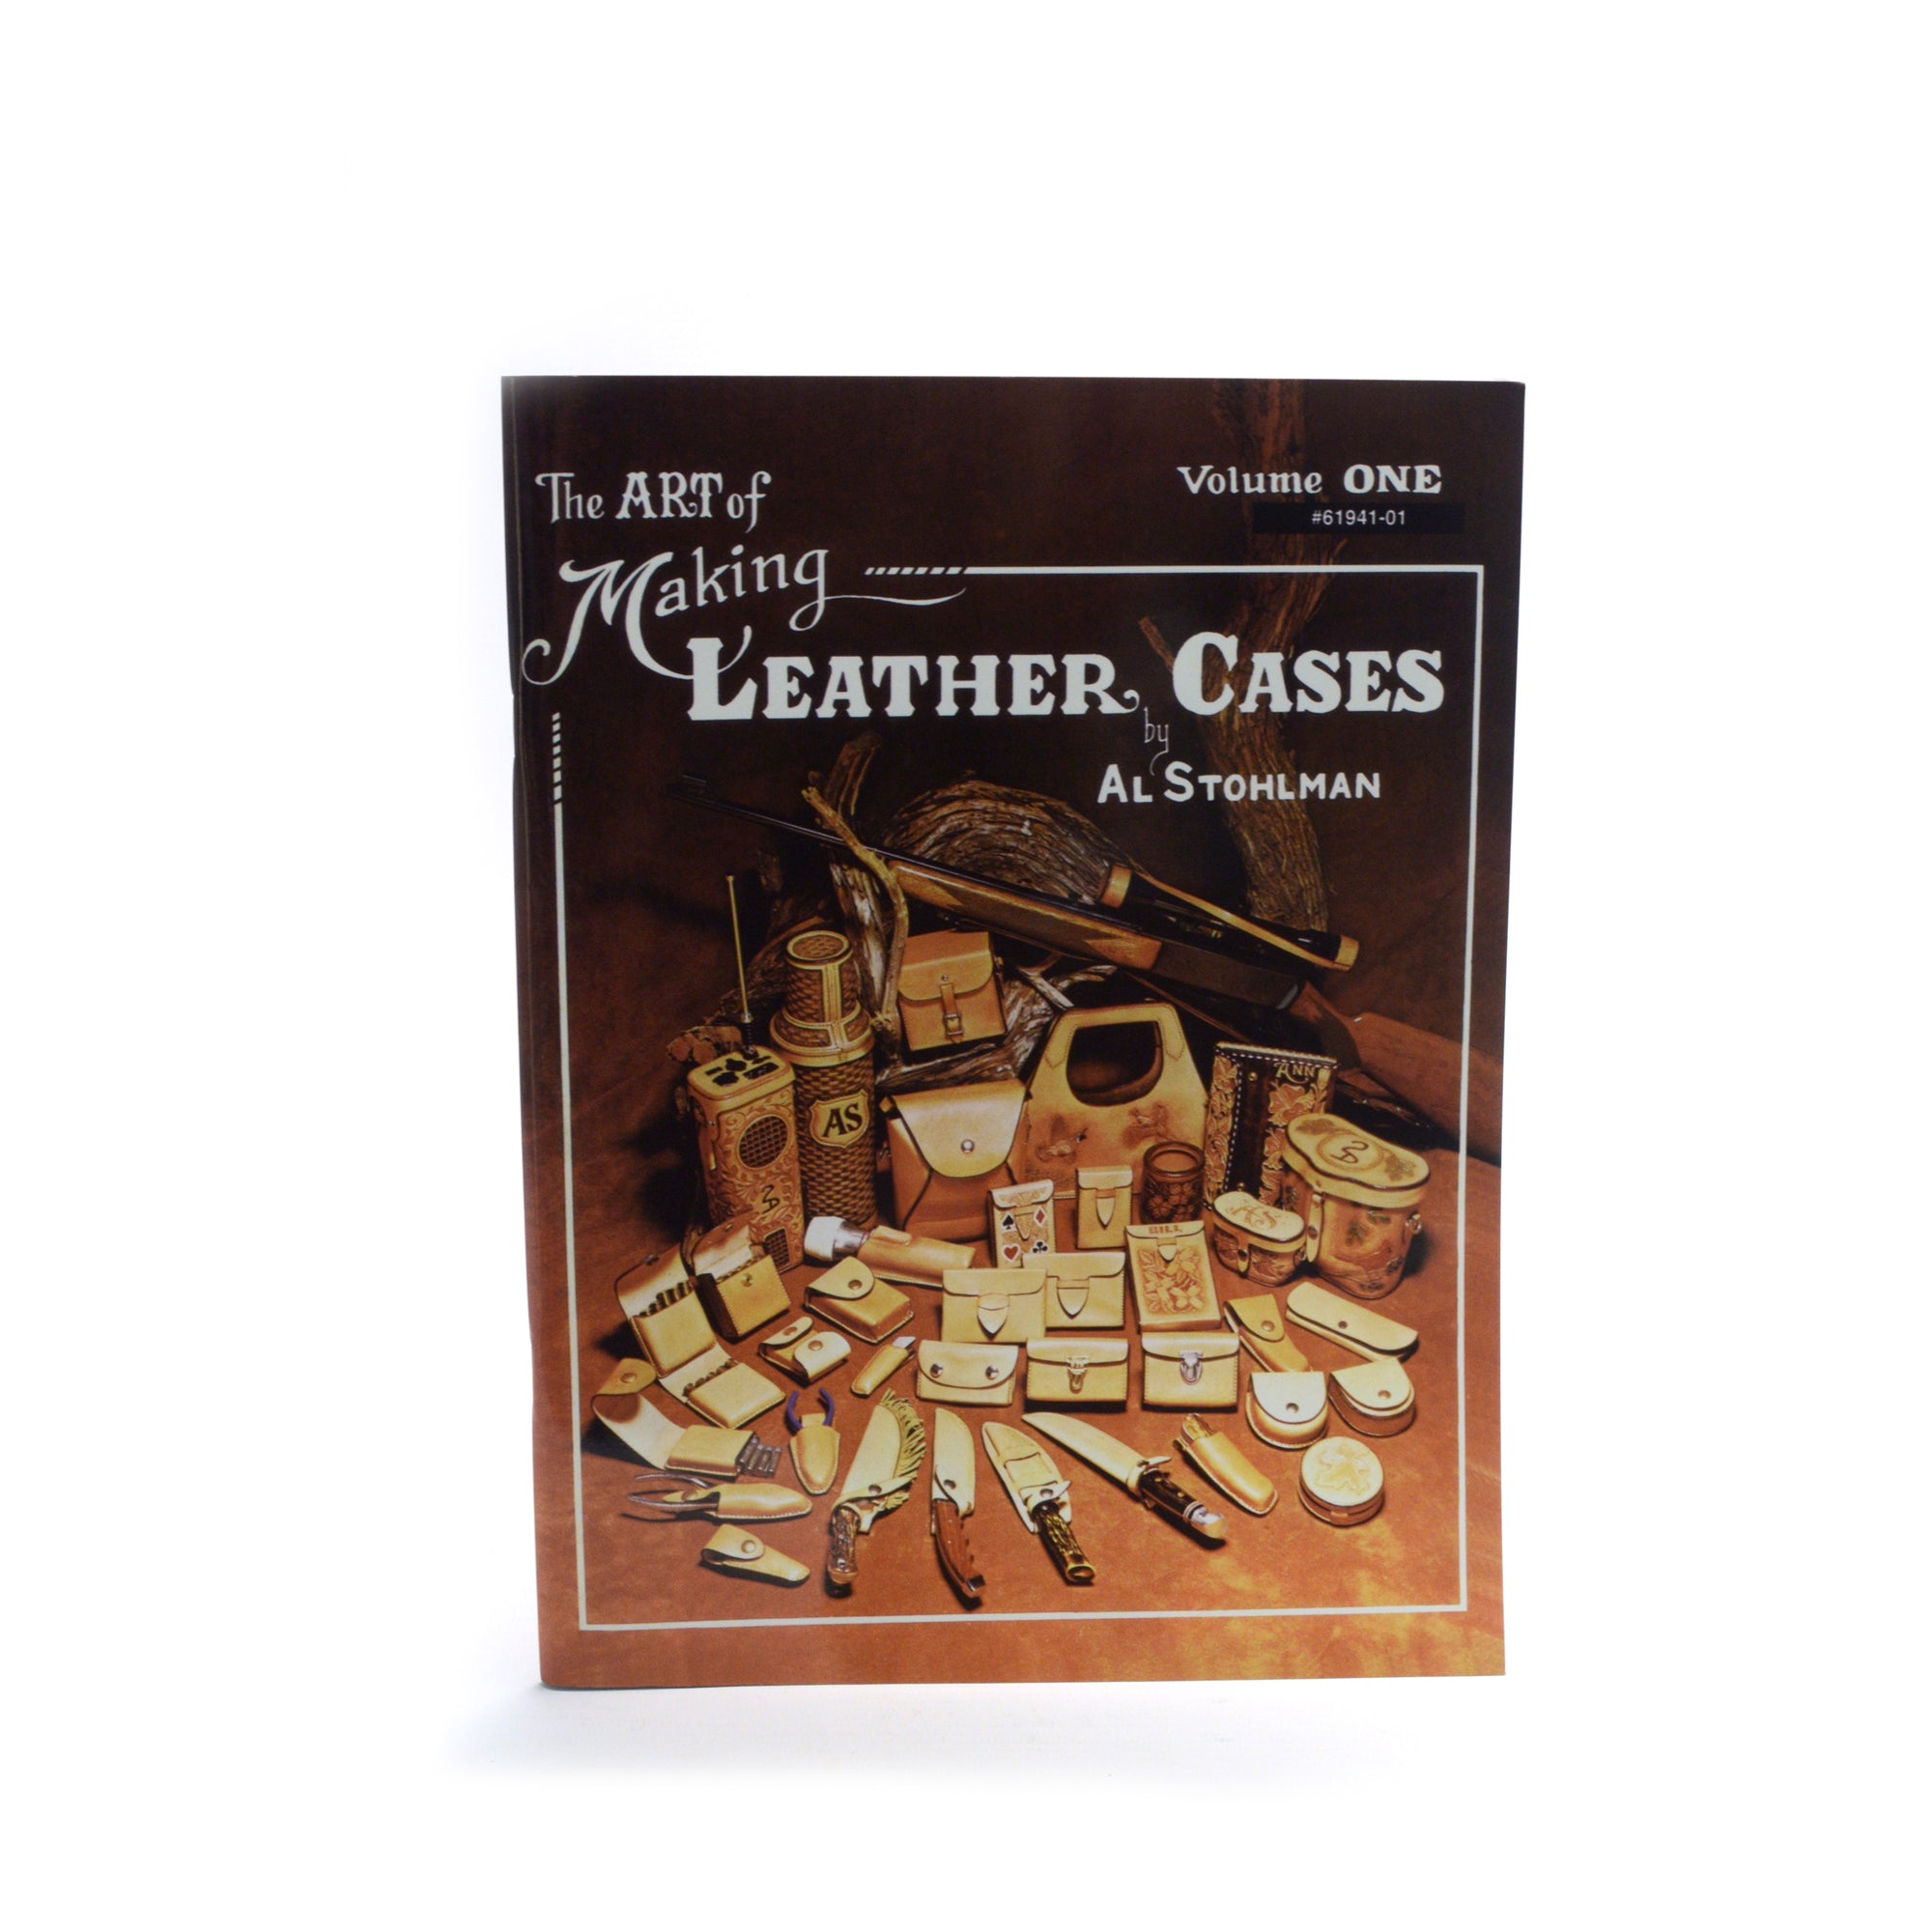 The Art of Making Leather Cases by Al Stohlman - Volume 1 from Identity Leathercraft